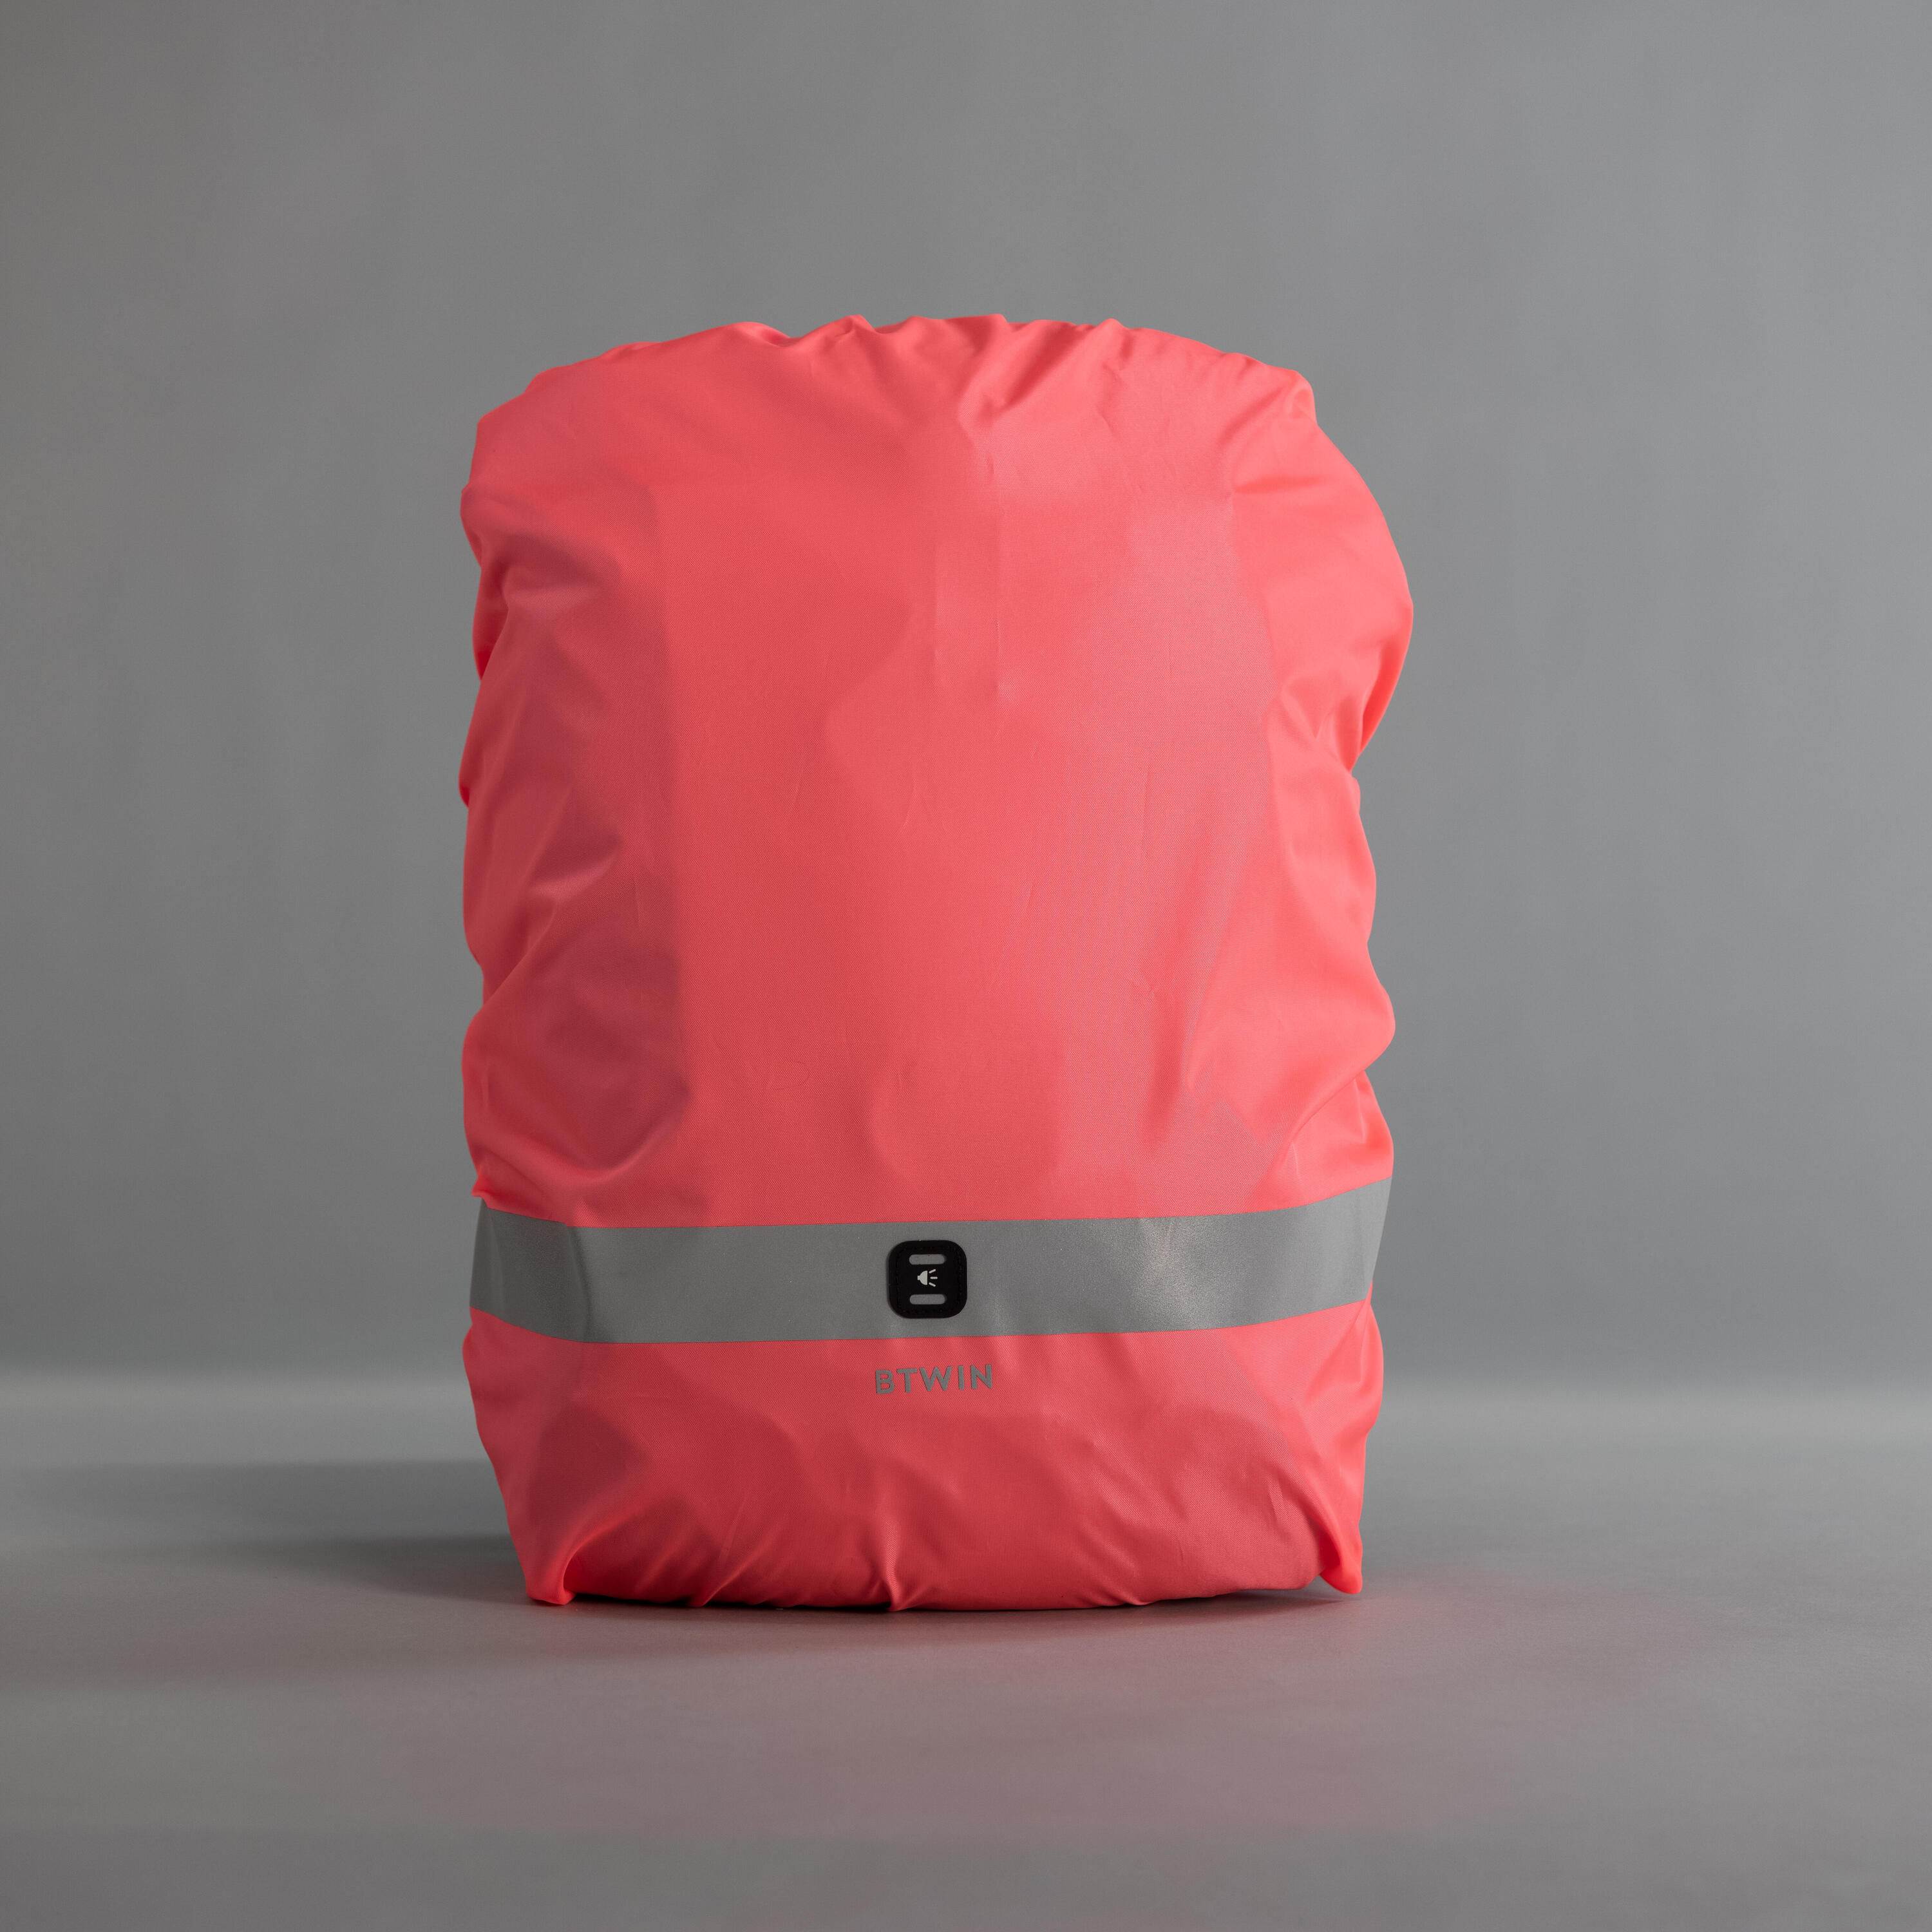 Waterproof Day/Night Visibility Bag Cover - Neon Pink 1/8